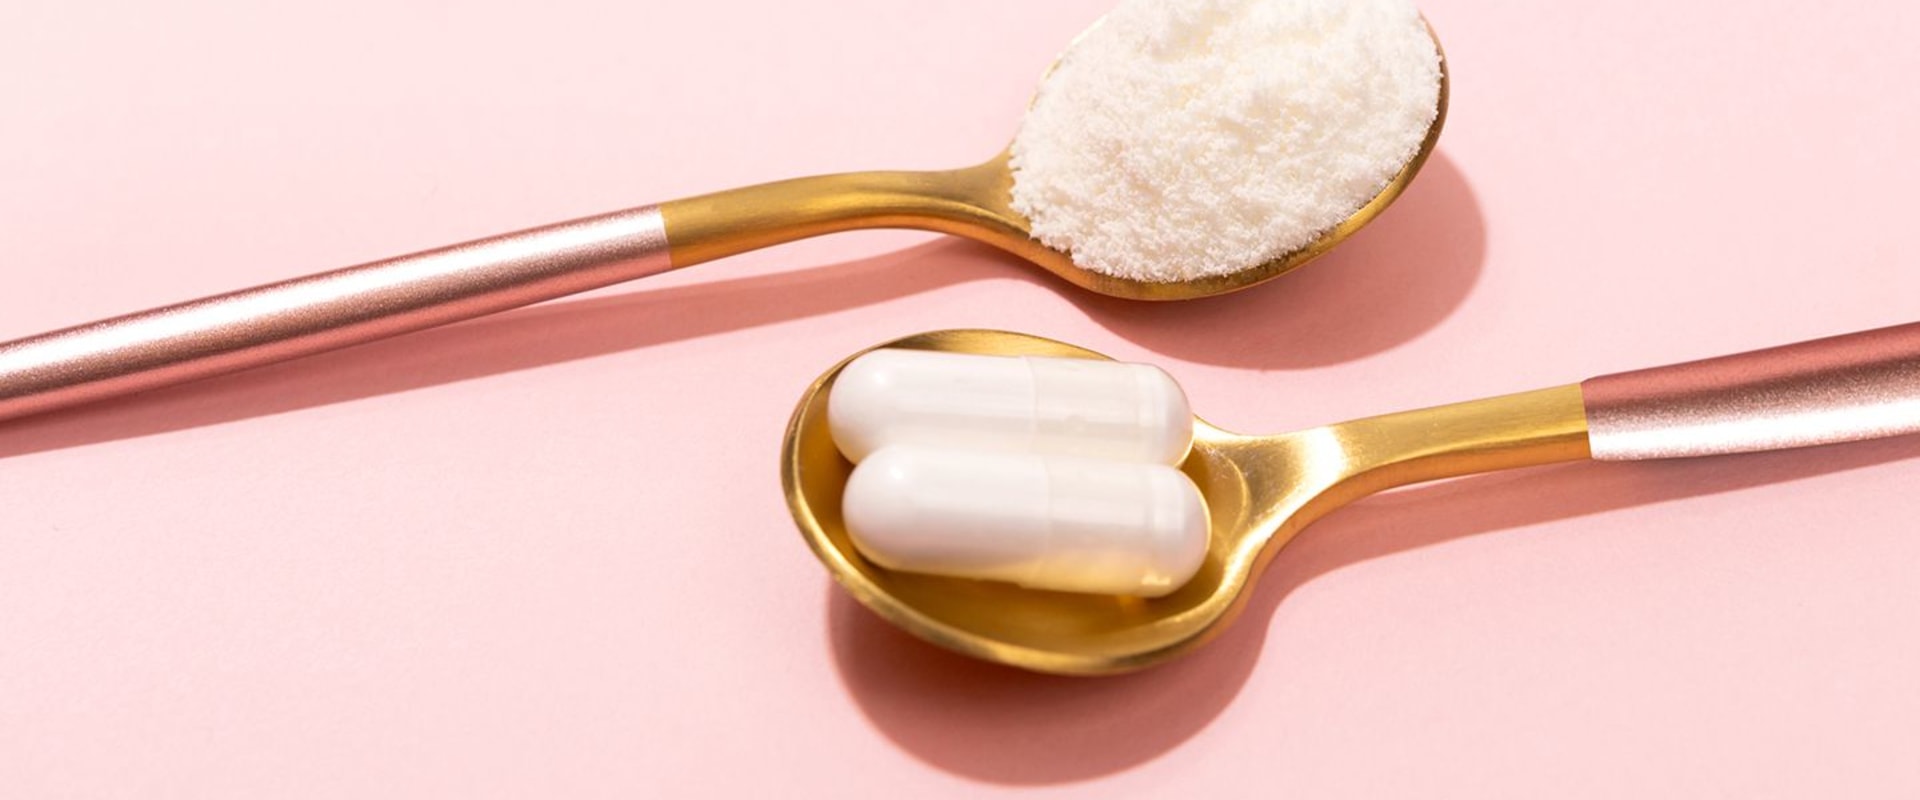 What is Collagen and What is it Made Of?